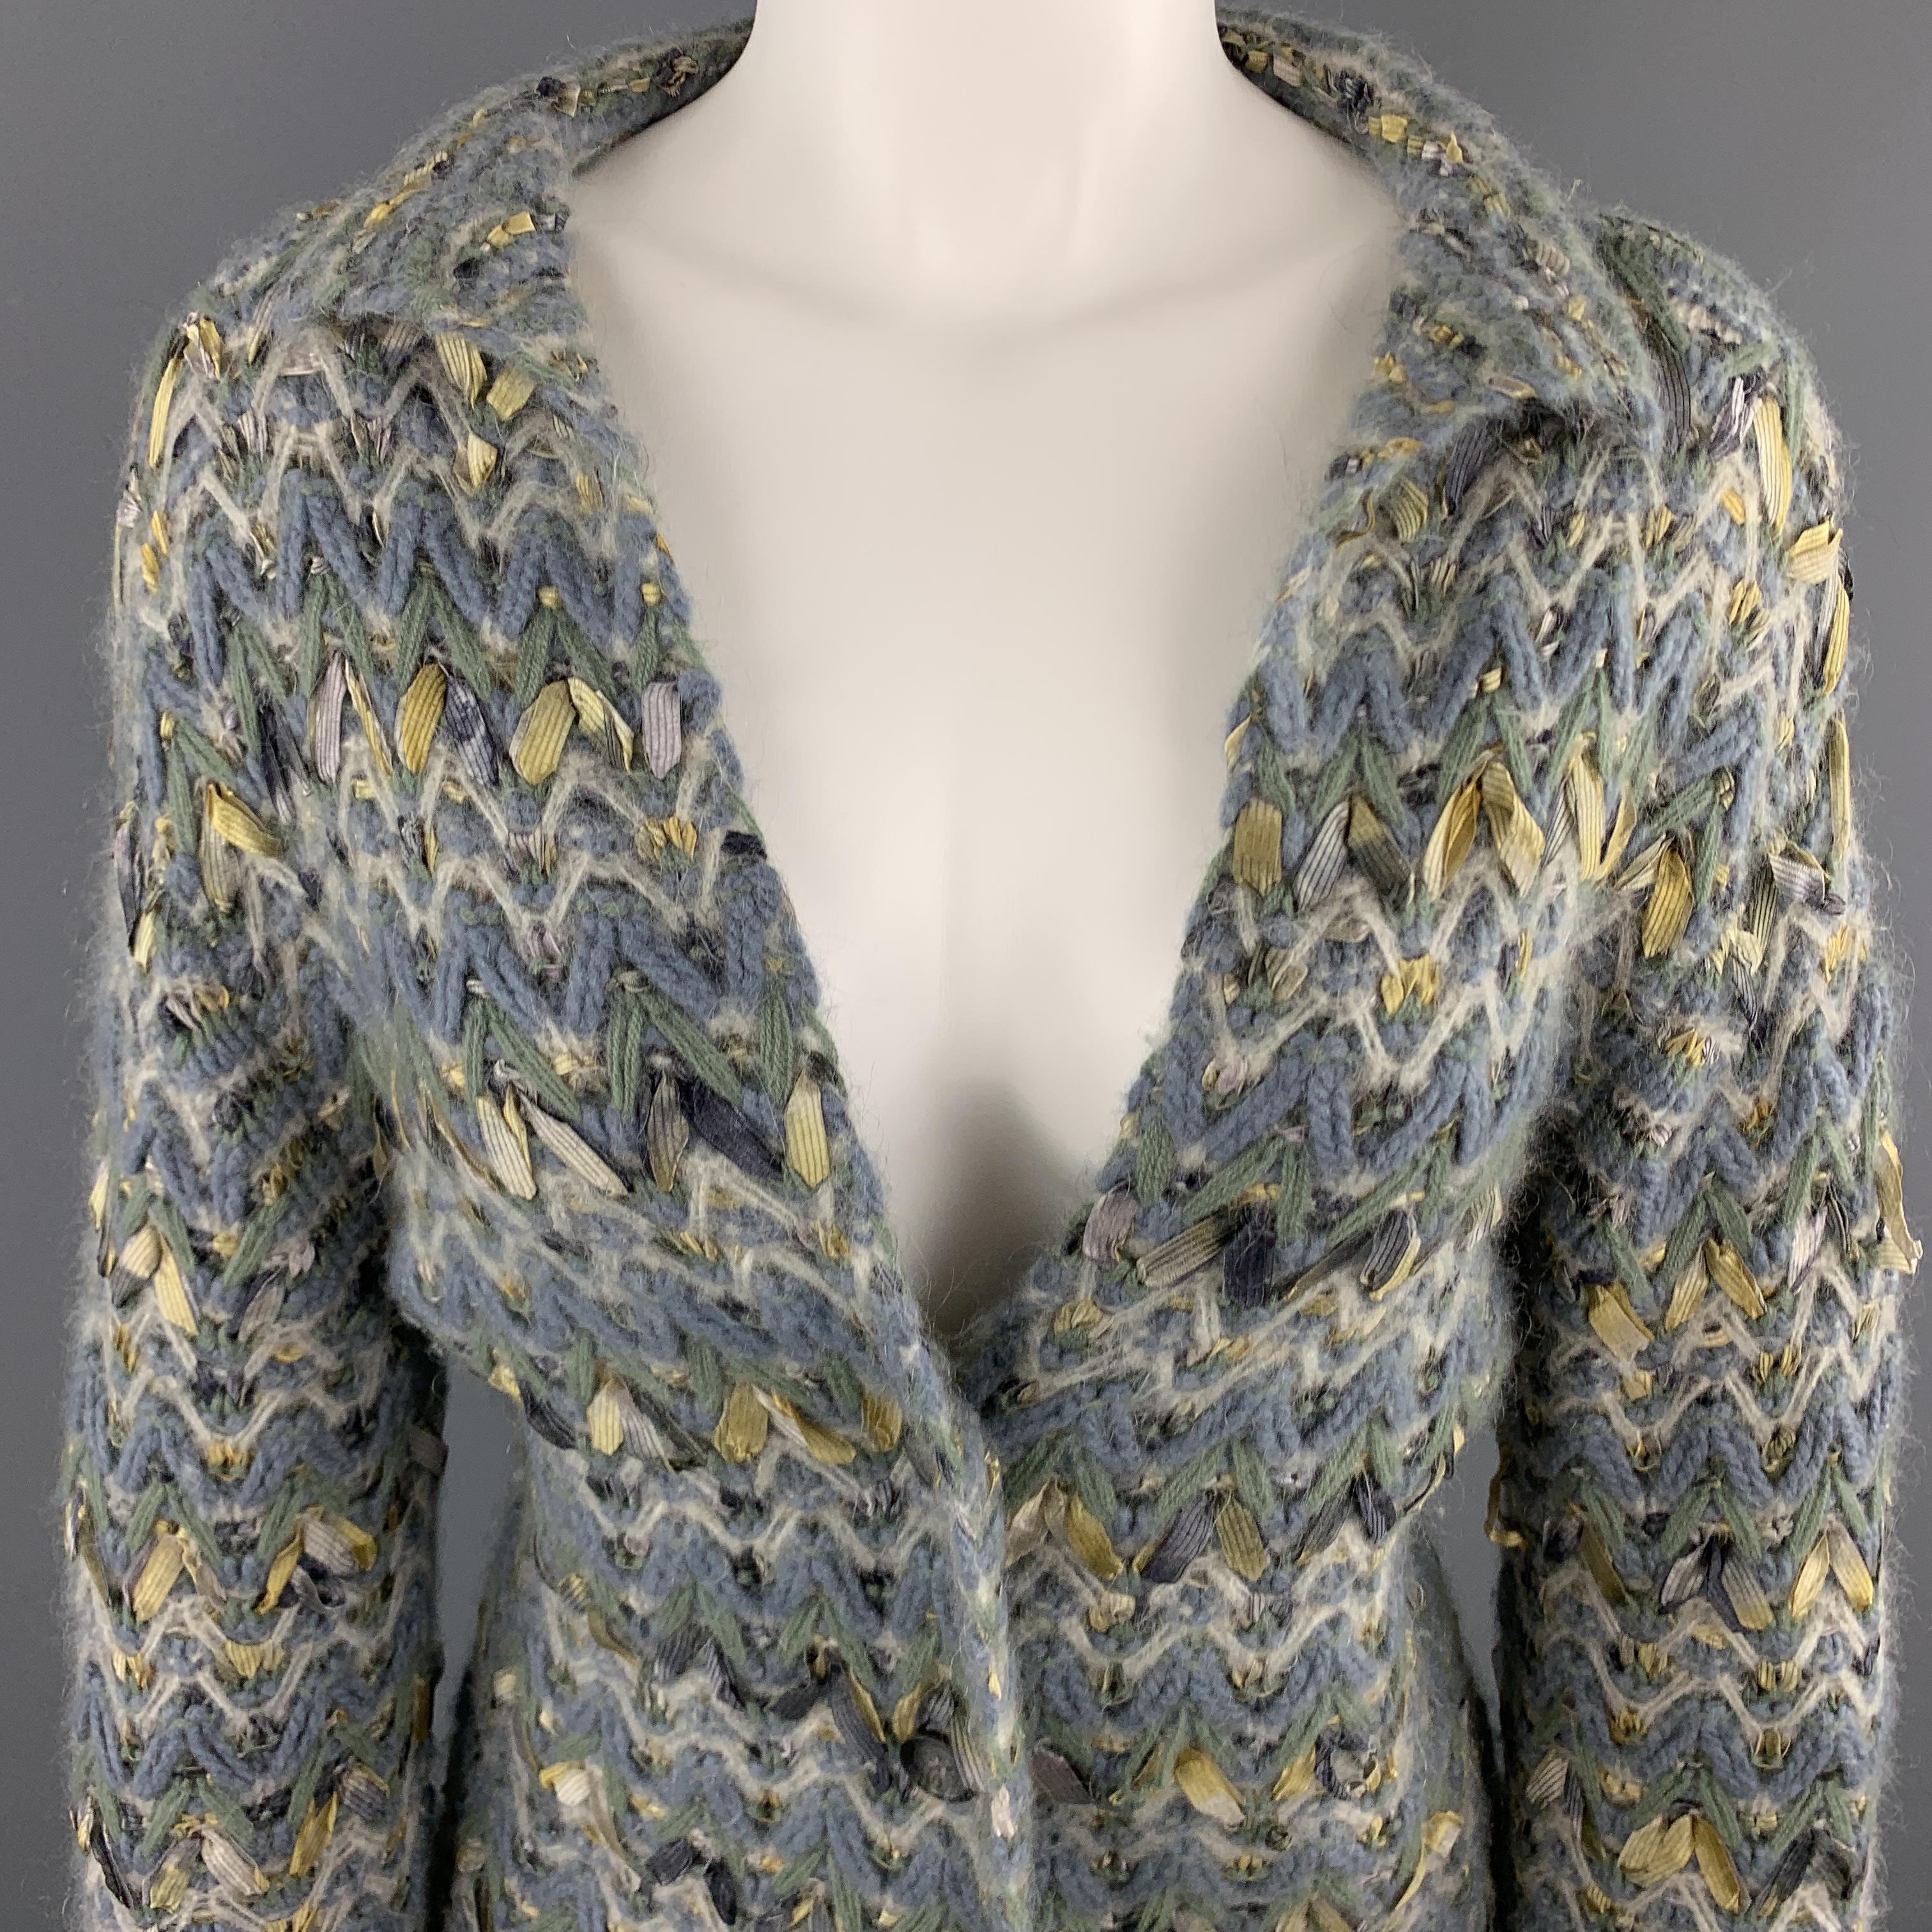 TSE cardigan jacket comes in muted blue and green chevron chunky knit with ribbon woven throughout, collared lapel, and three button front. 

Excellent Pre-Owned Condition.
Marked: M

Measurements:

Shoulder: 17 in.
Bust: 36 in.
Sleeve: 26